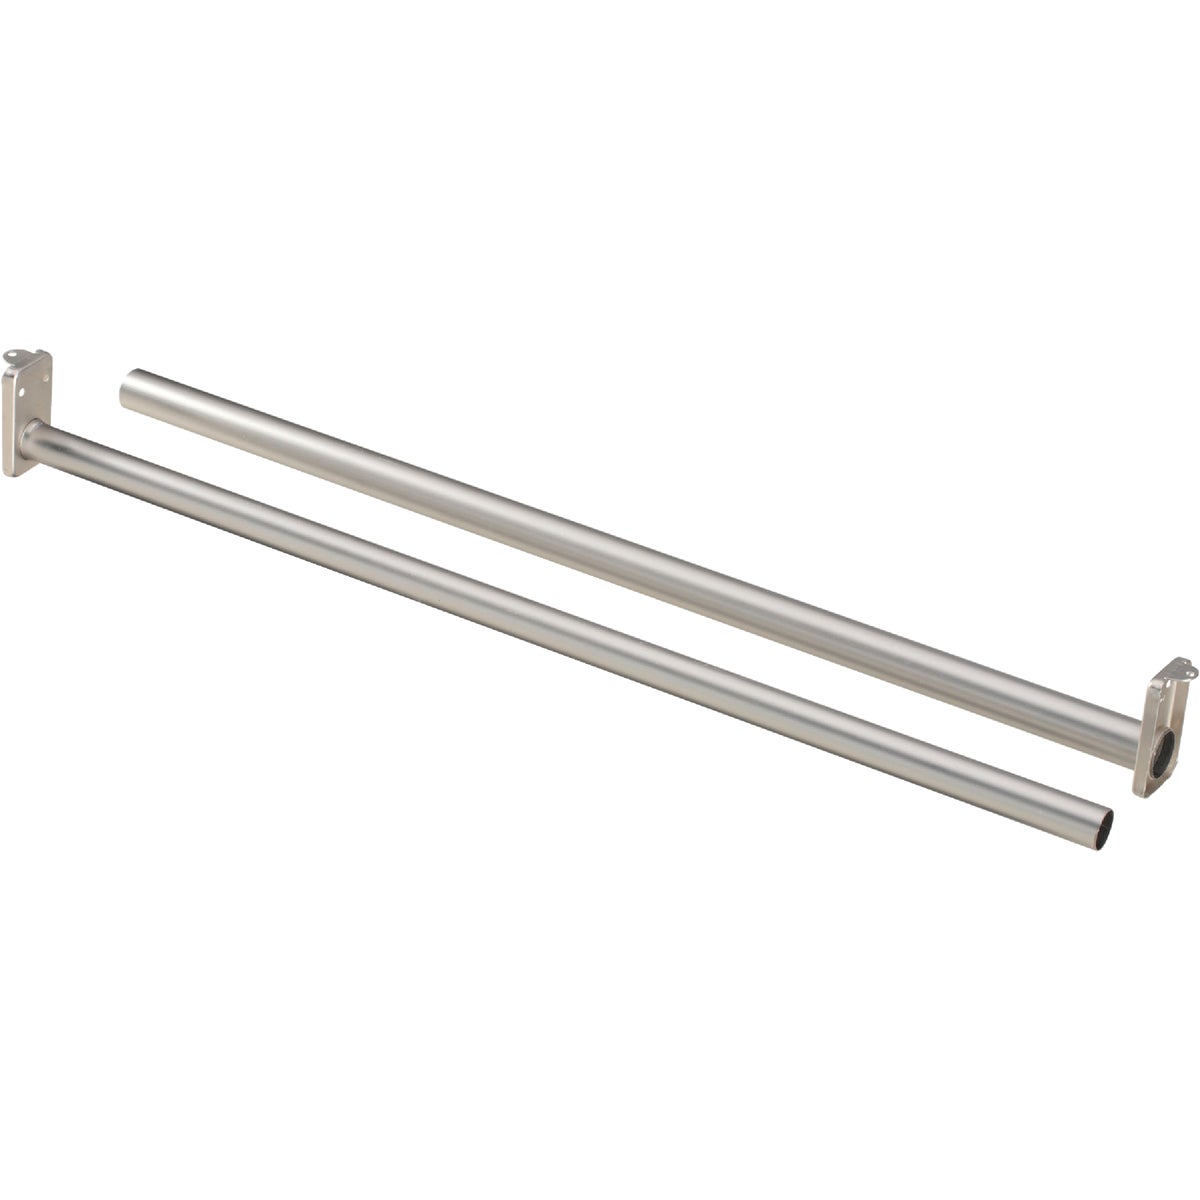 National 48 In. To 72 In. Adjustable Closet Rod, Satin Nickel